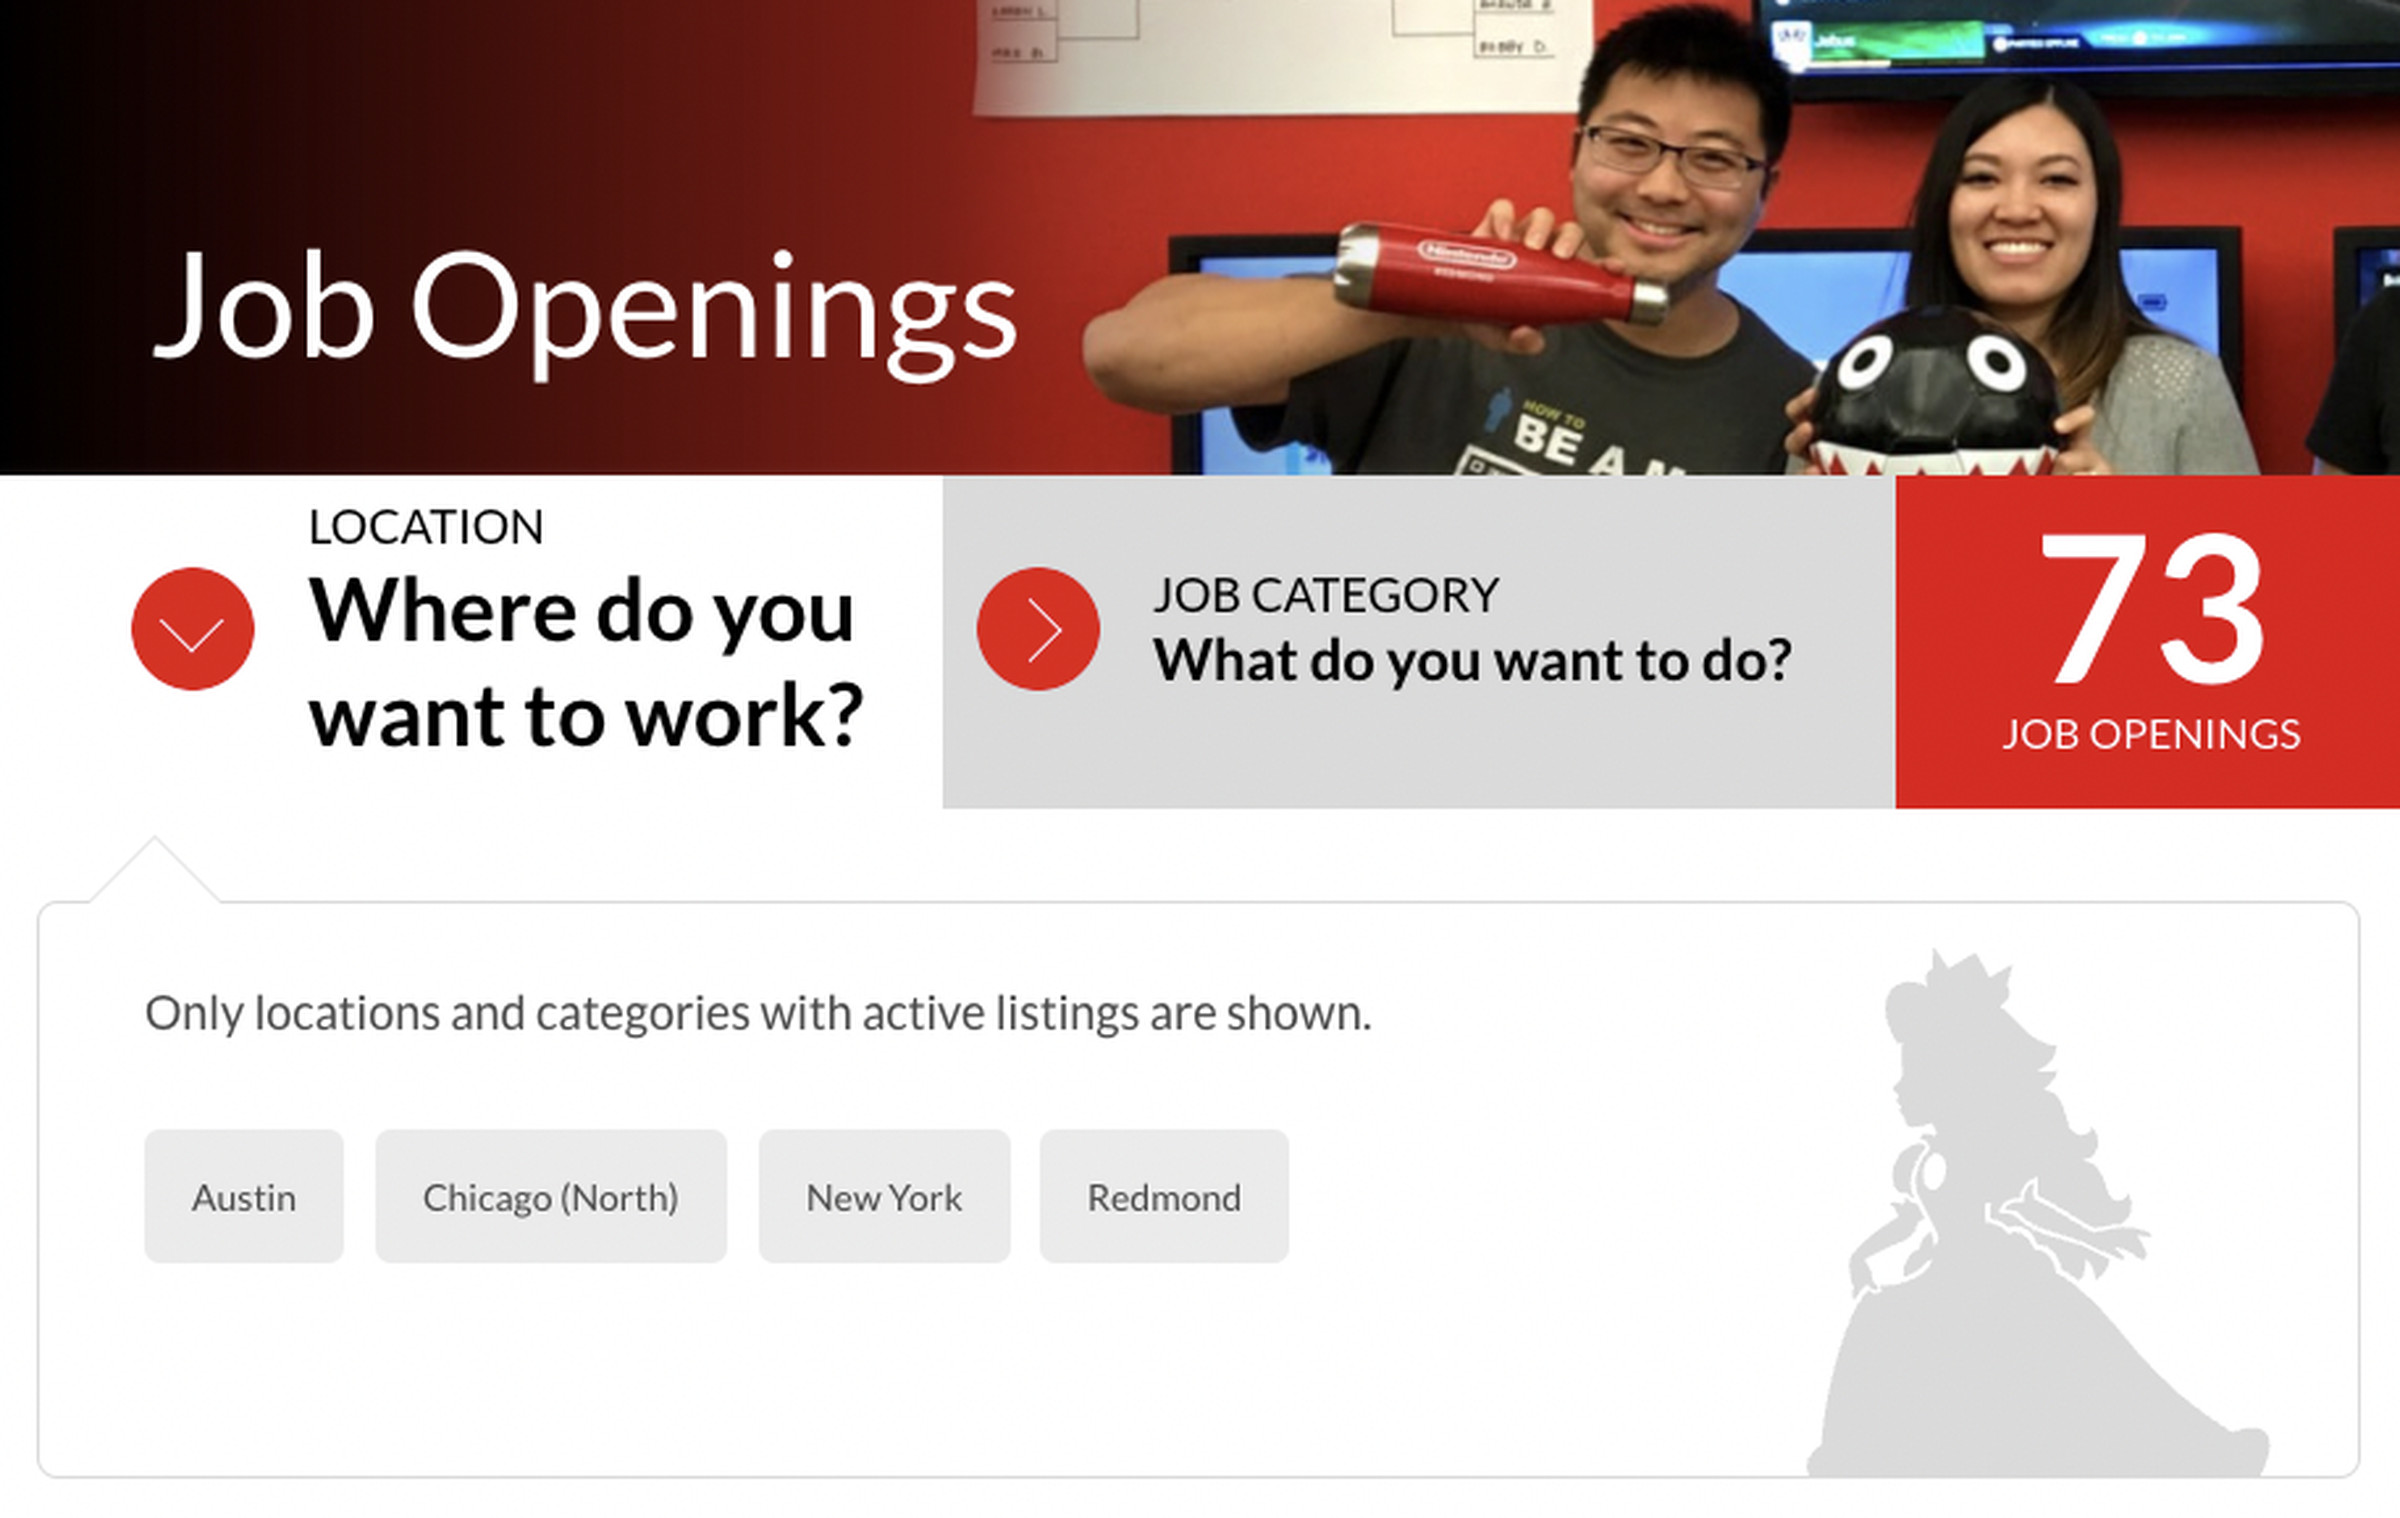 Redwood City doesn’t have any open roles.